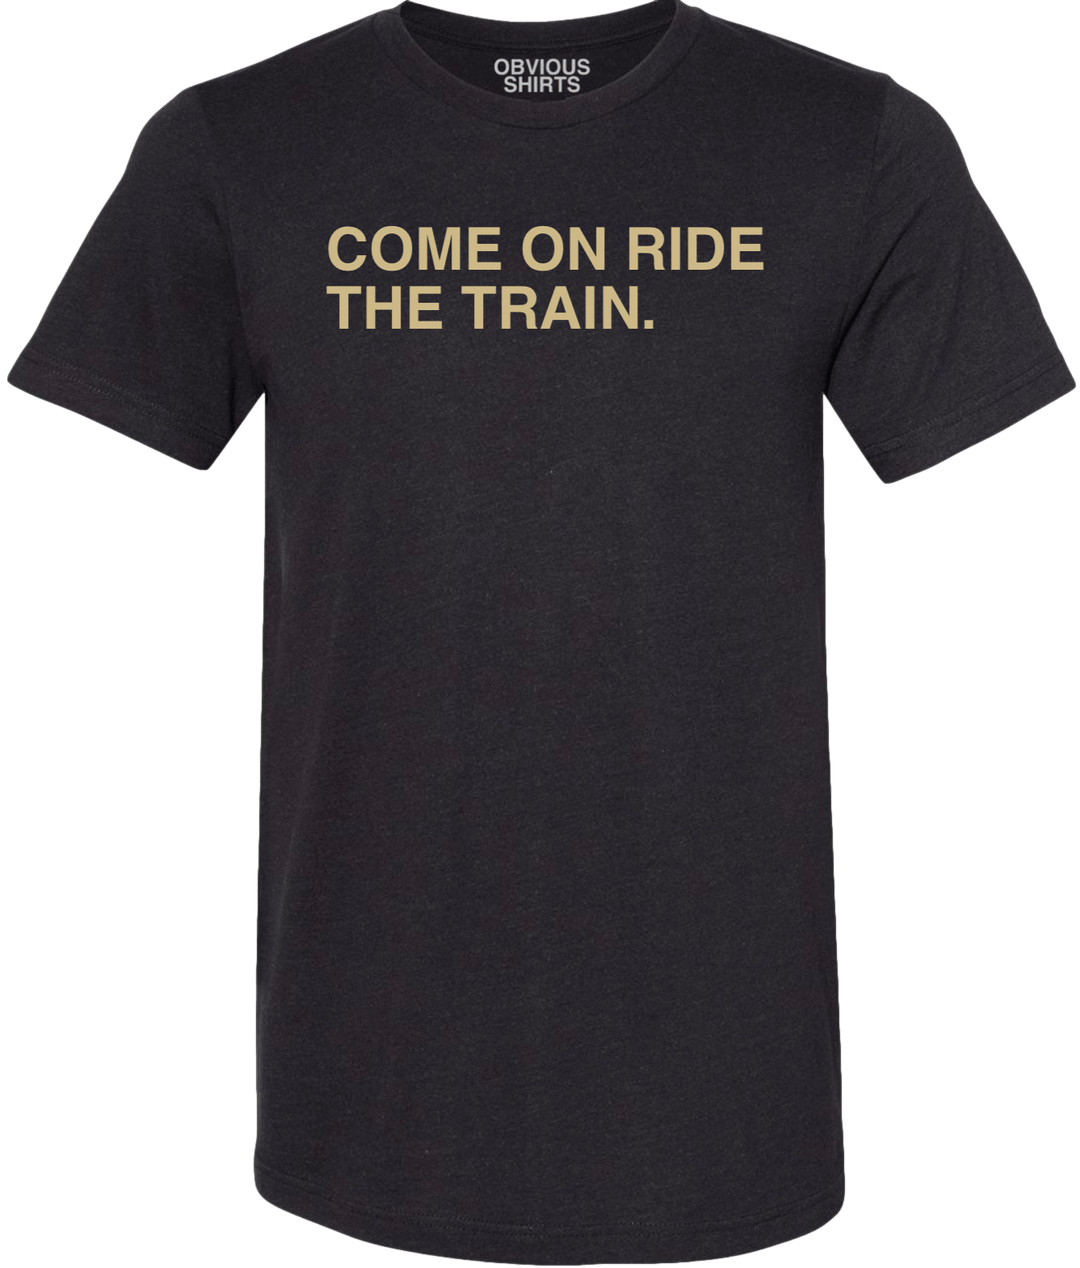 COME ON RIDE THE TRAIN - OBVIOUS SHIRTS